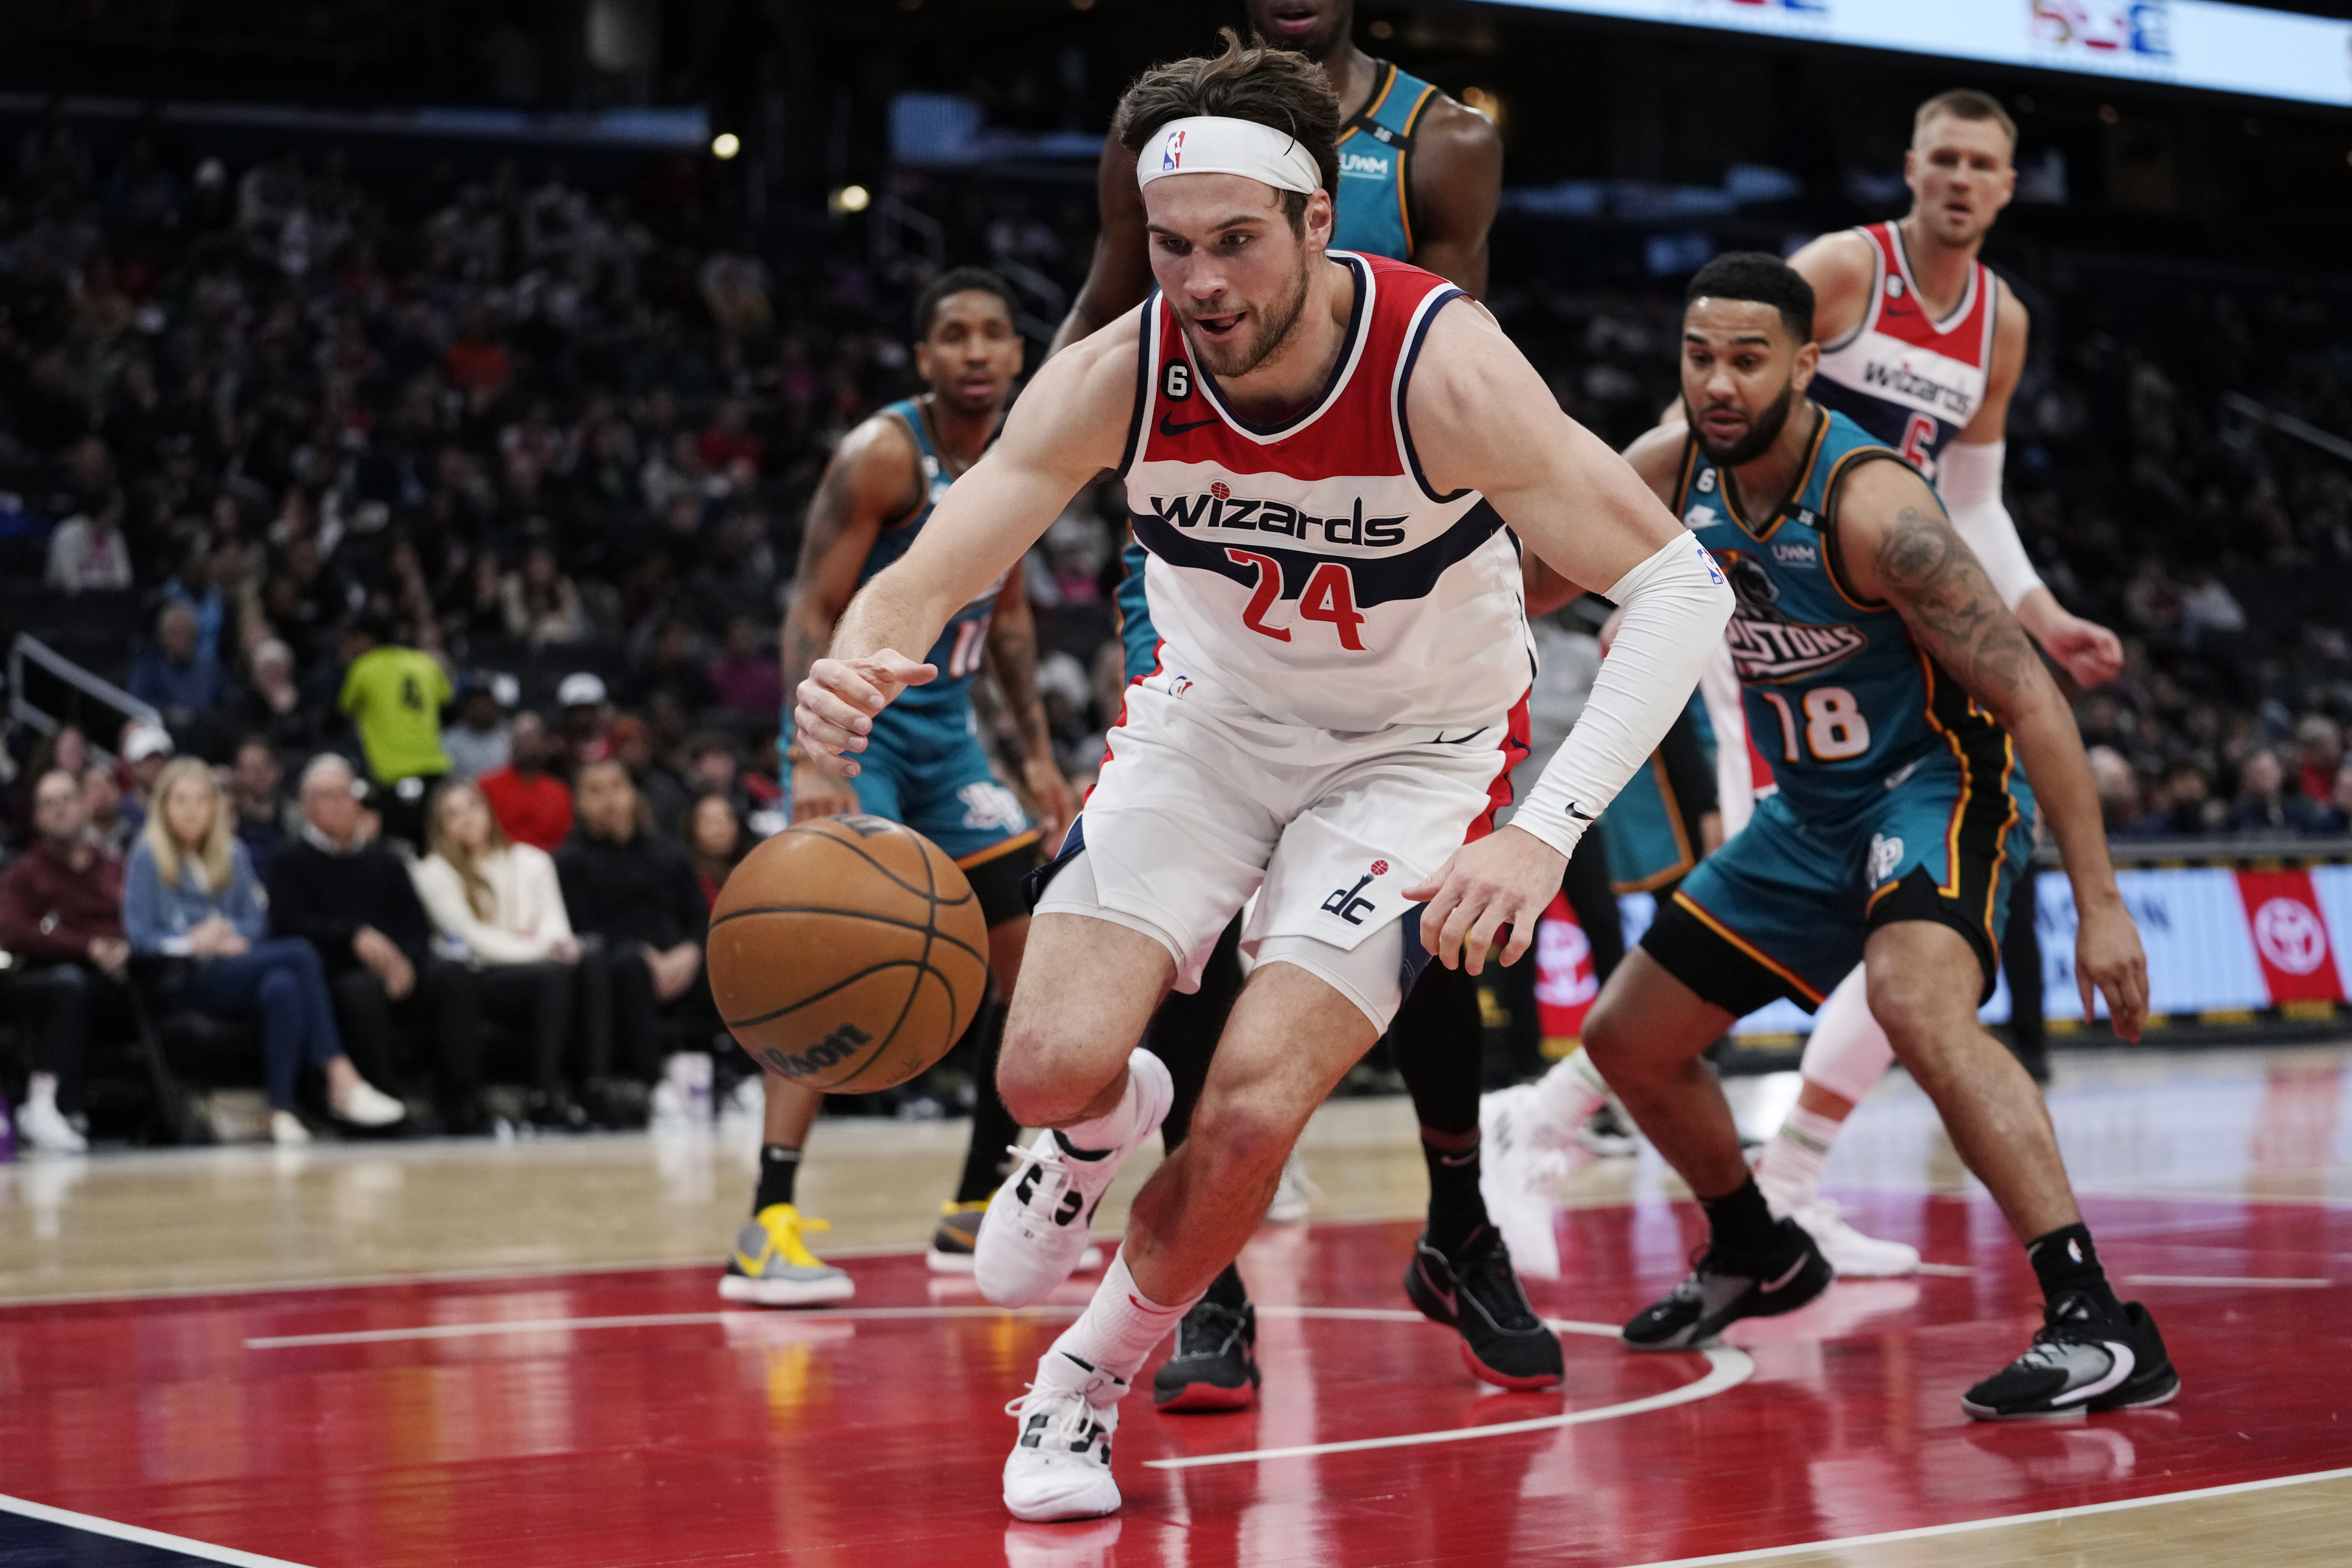 Wizards defeat Pistons to end nine-game losing streak - The Washington Post